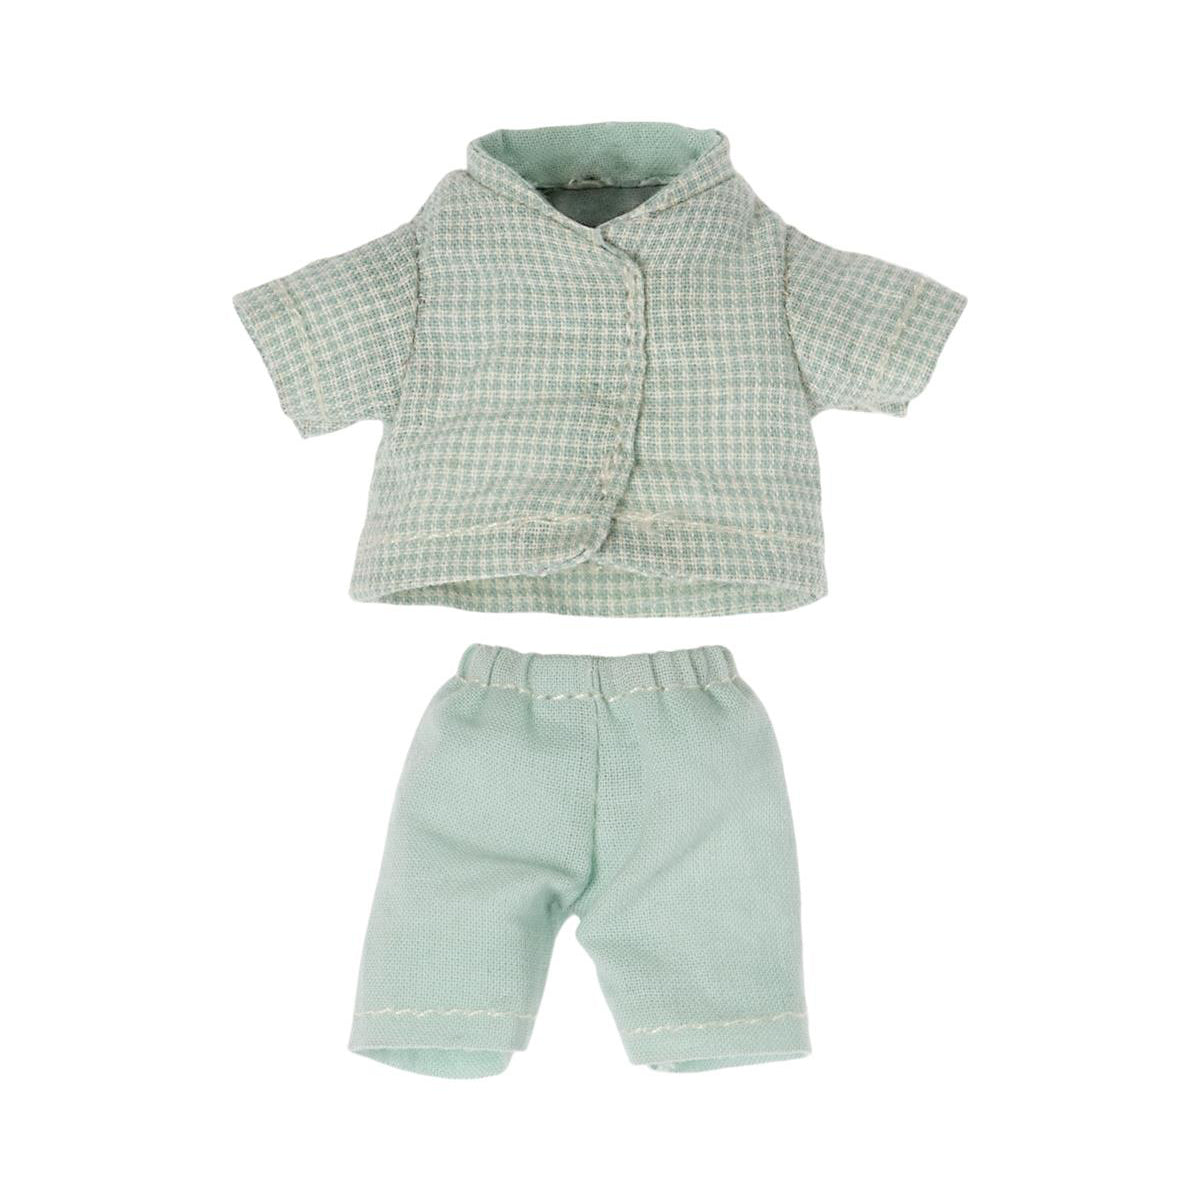 tiny maileg little Mouse pale blue pyjamas, with a check top and plain trousers